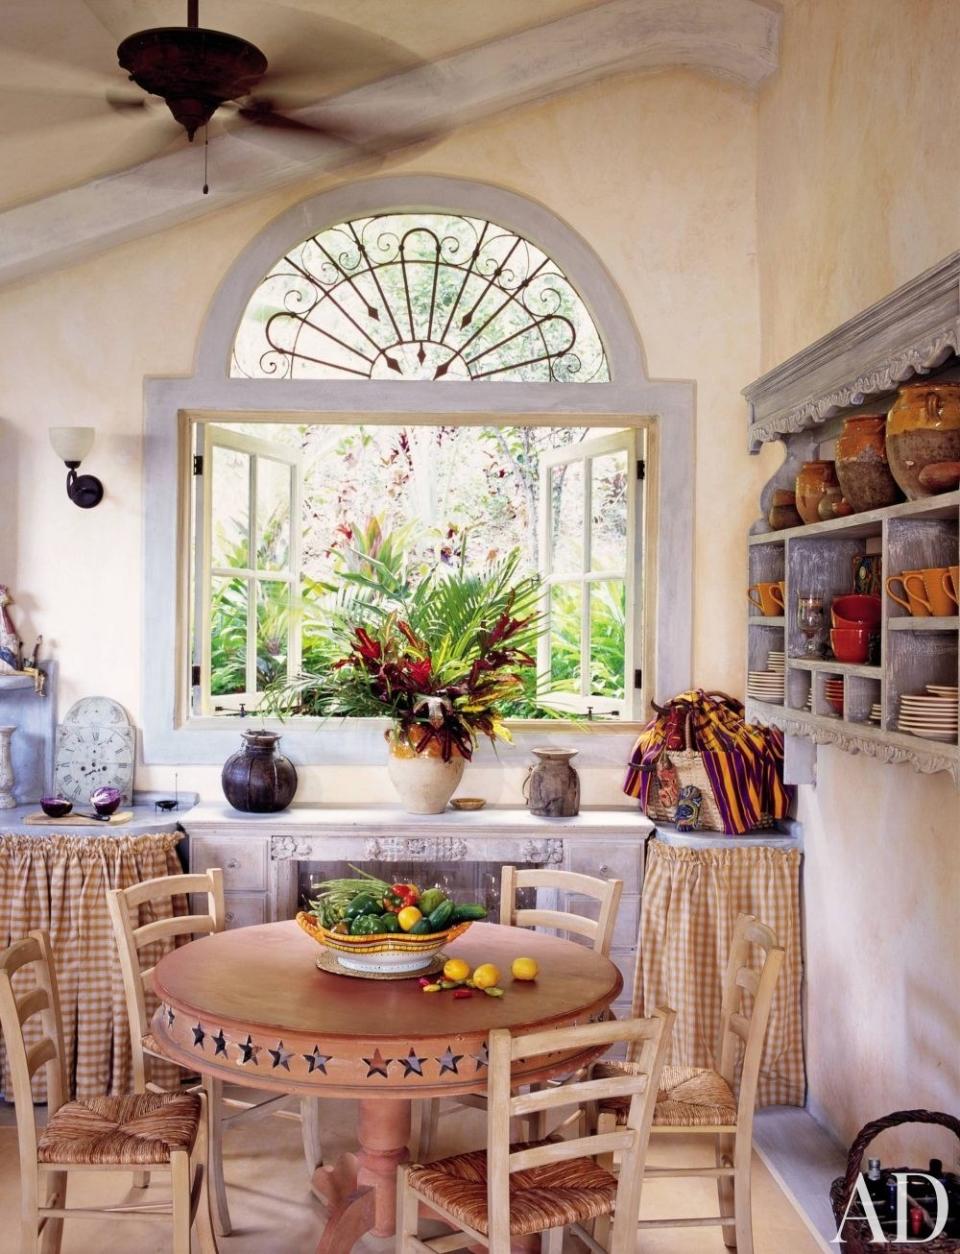 Sweet gingham fabric hides storage in this charming kitchen/dining area, found in an Isla Taboga, Panama, home.